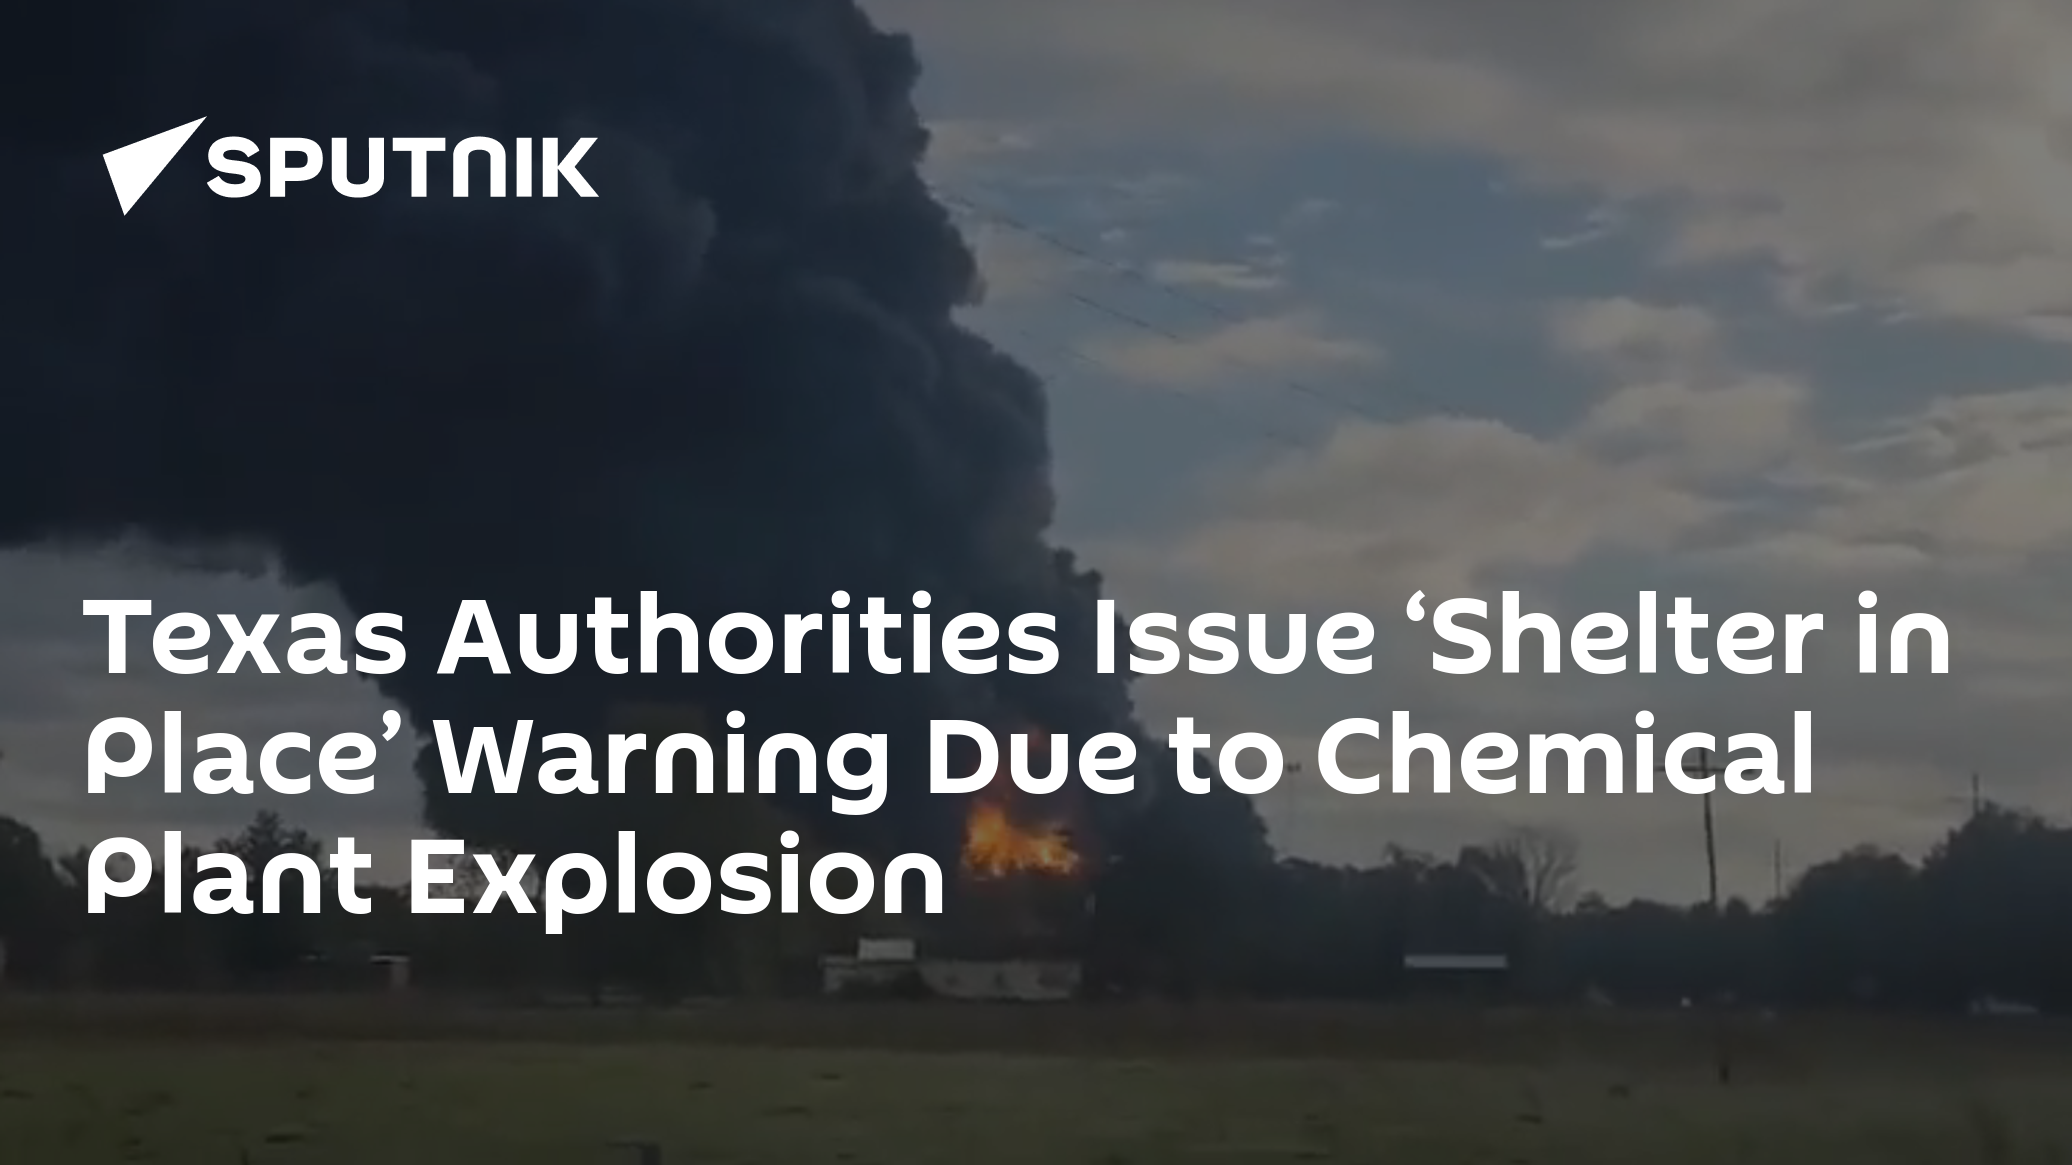 Texas Authorities Issue ‘Shelter in Place’ Warning Due to Chemical Plant Explosion